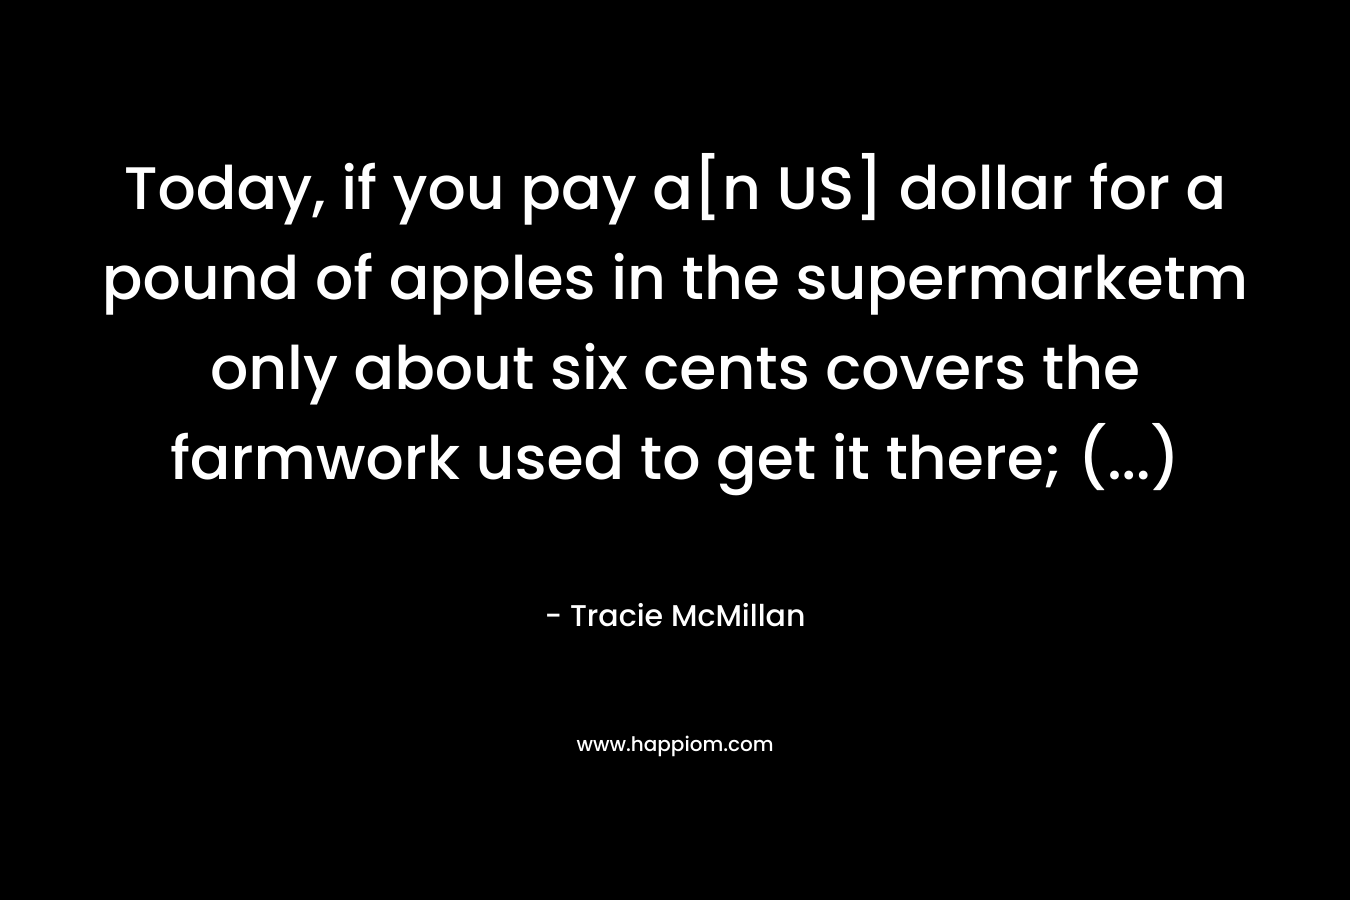 Today, if you pay a[n US] dollar for a pound of apples in the supermarketm only about six cents covers the farmwork used to get it there; (…) – Tracie McMillan